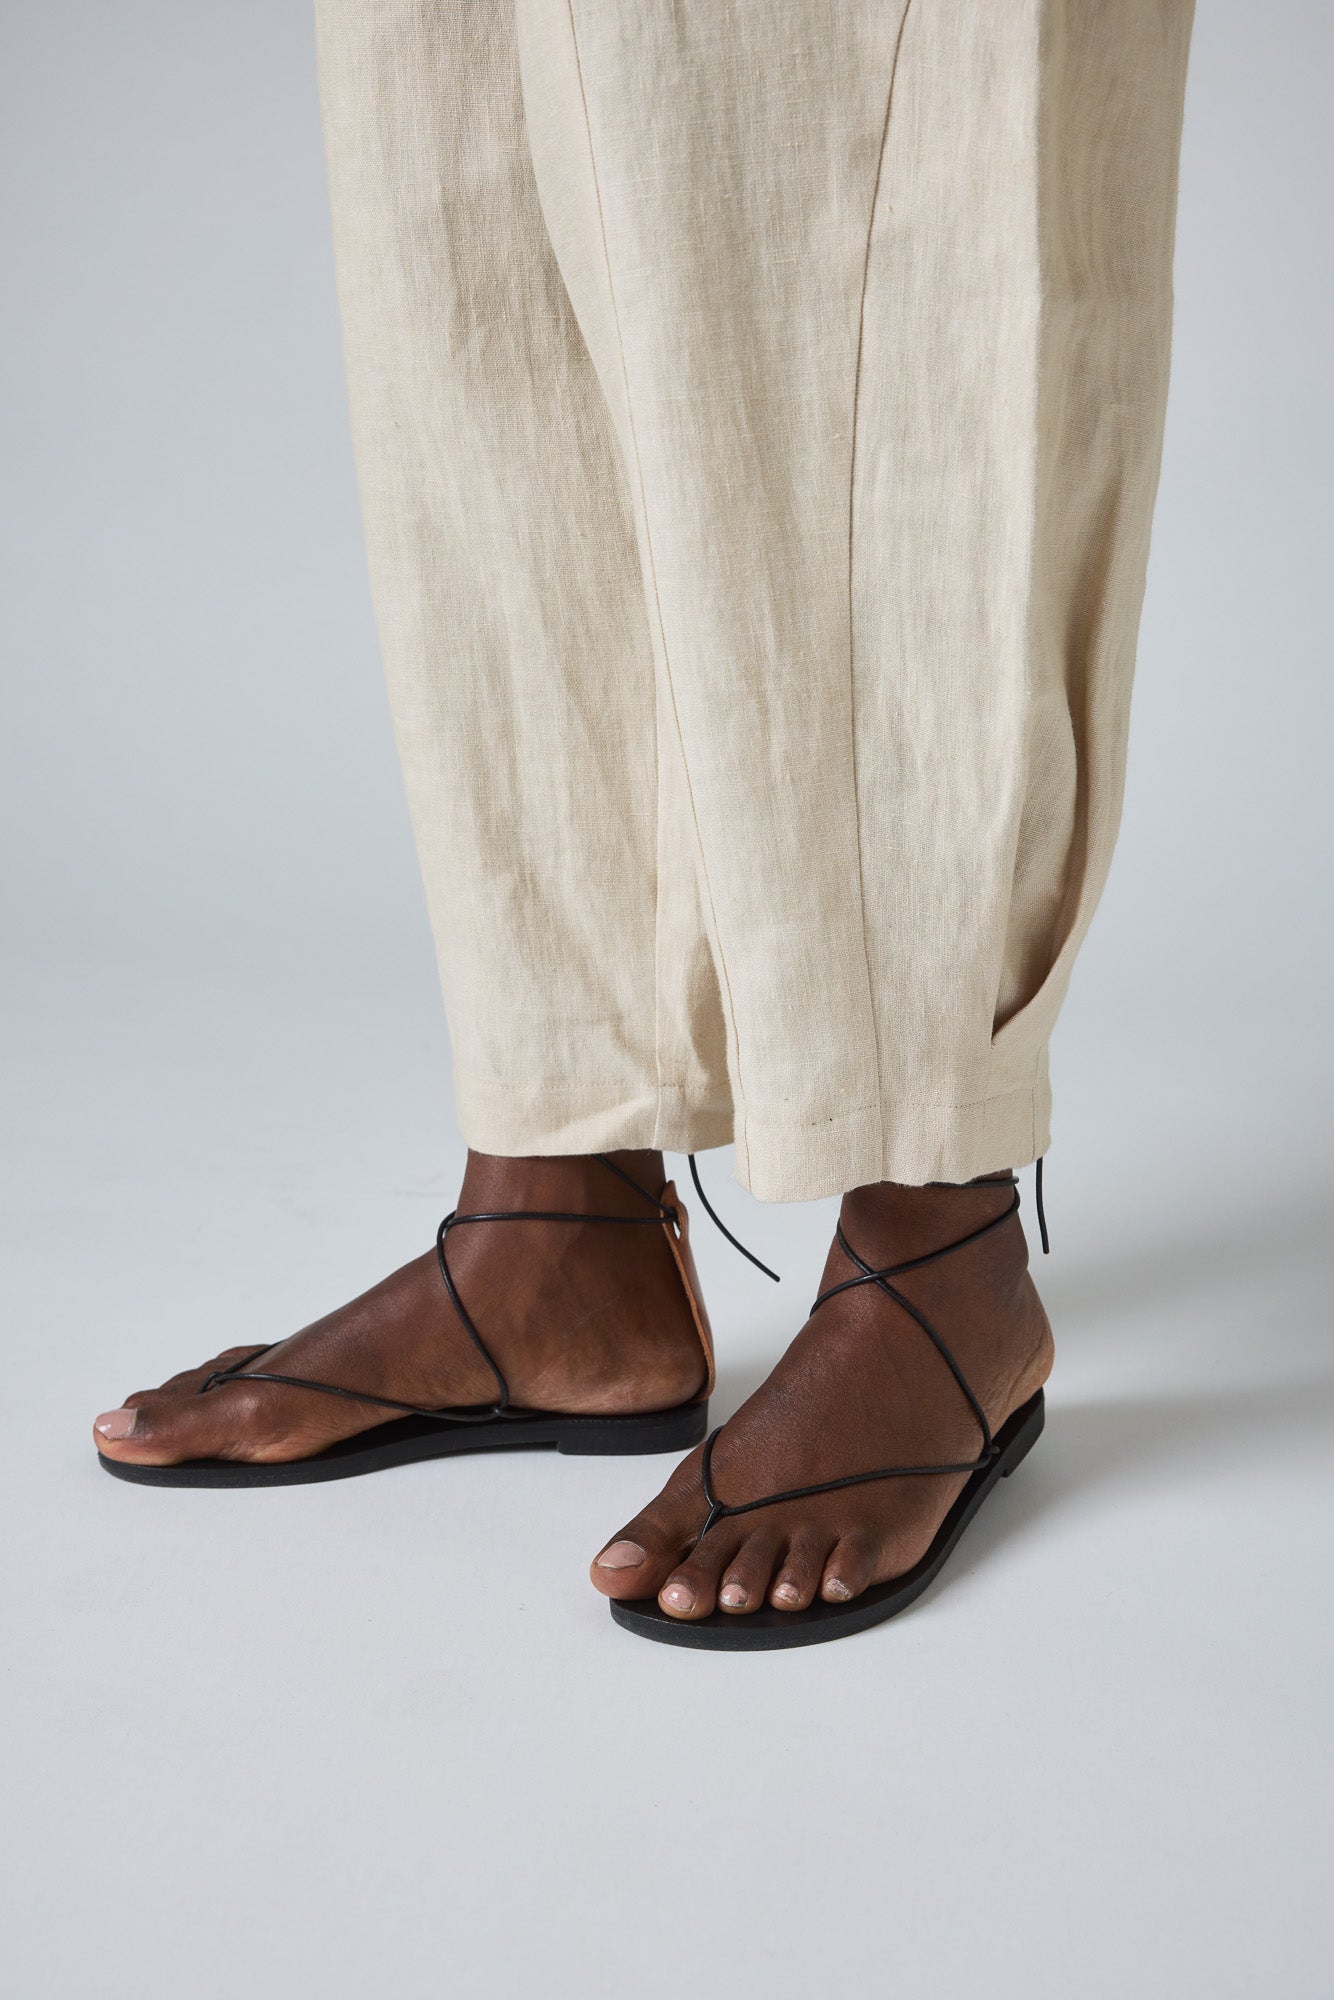 The Linen Detail Oriented Tapered Pant